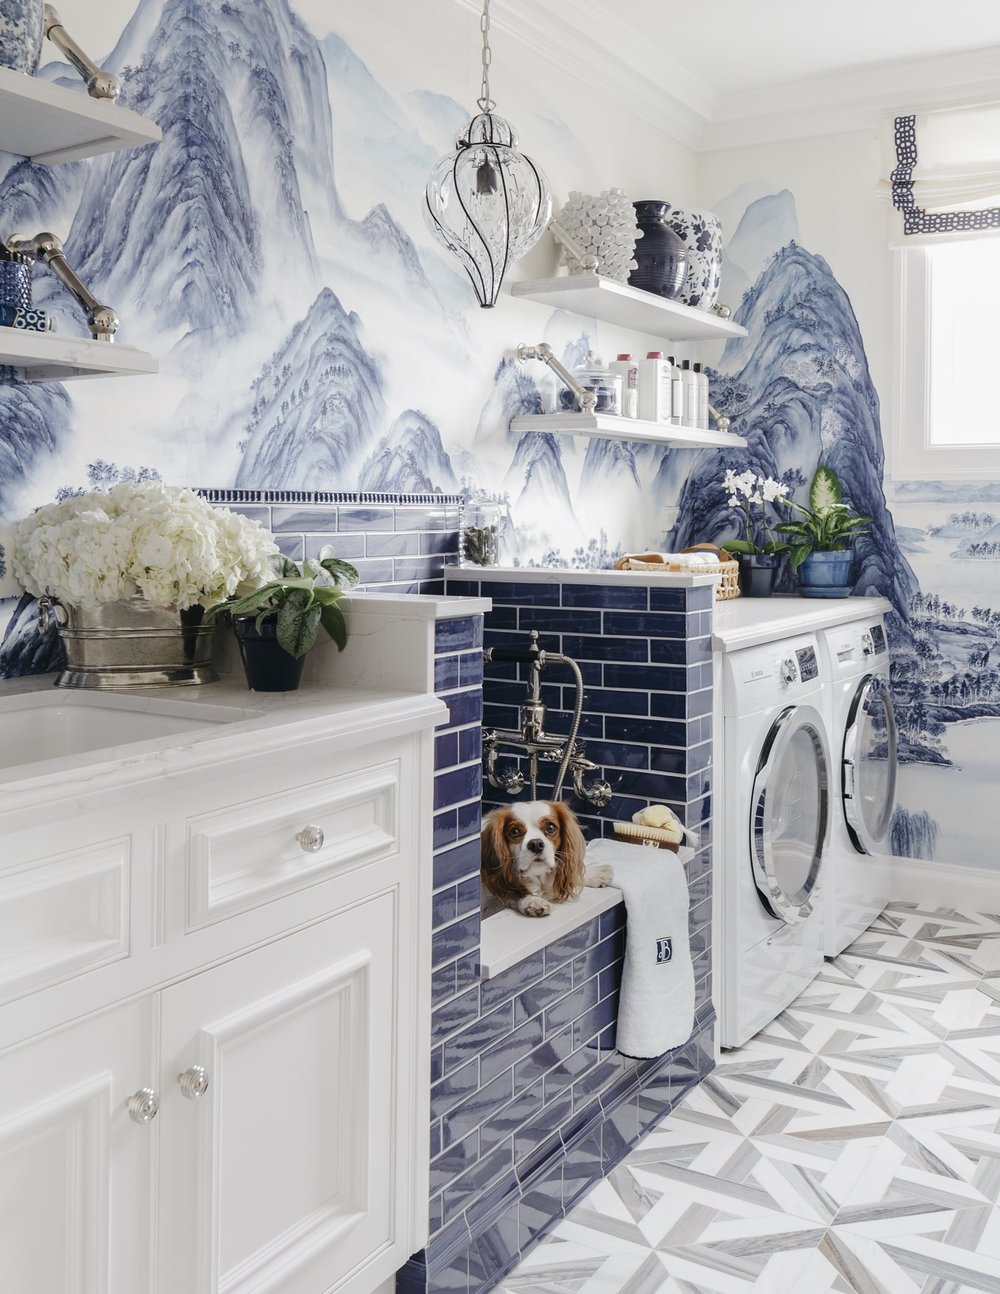 Décor Inspiration: The Chicest Laundry Room Ever